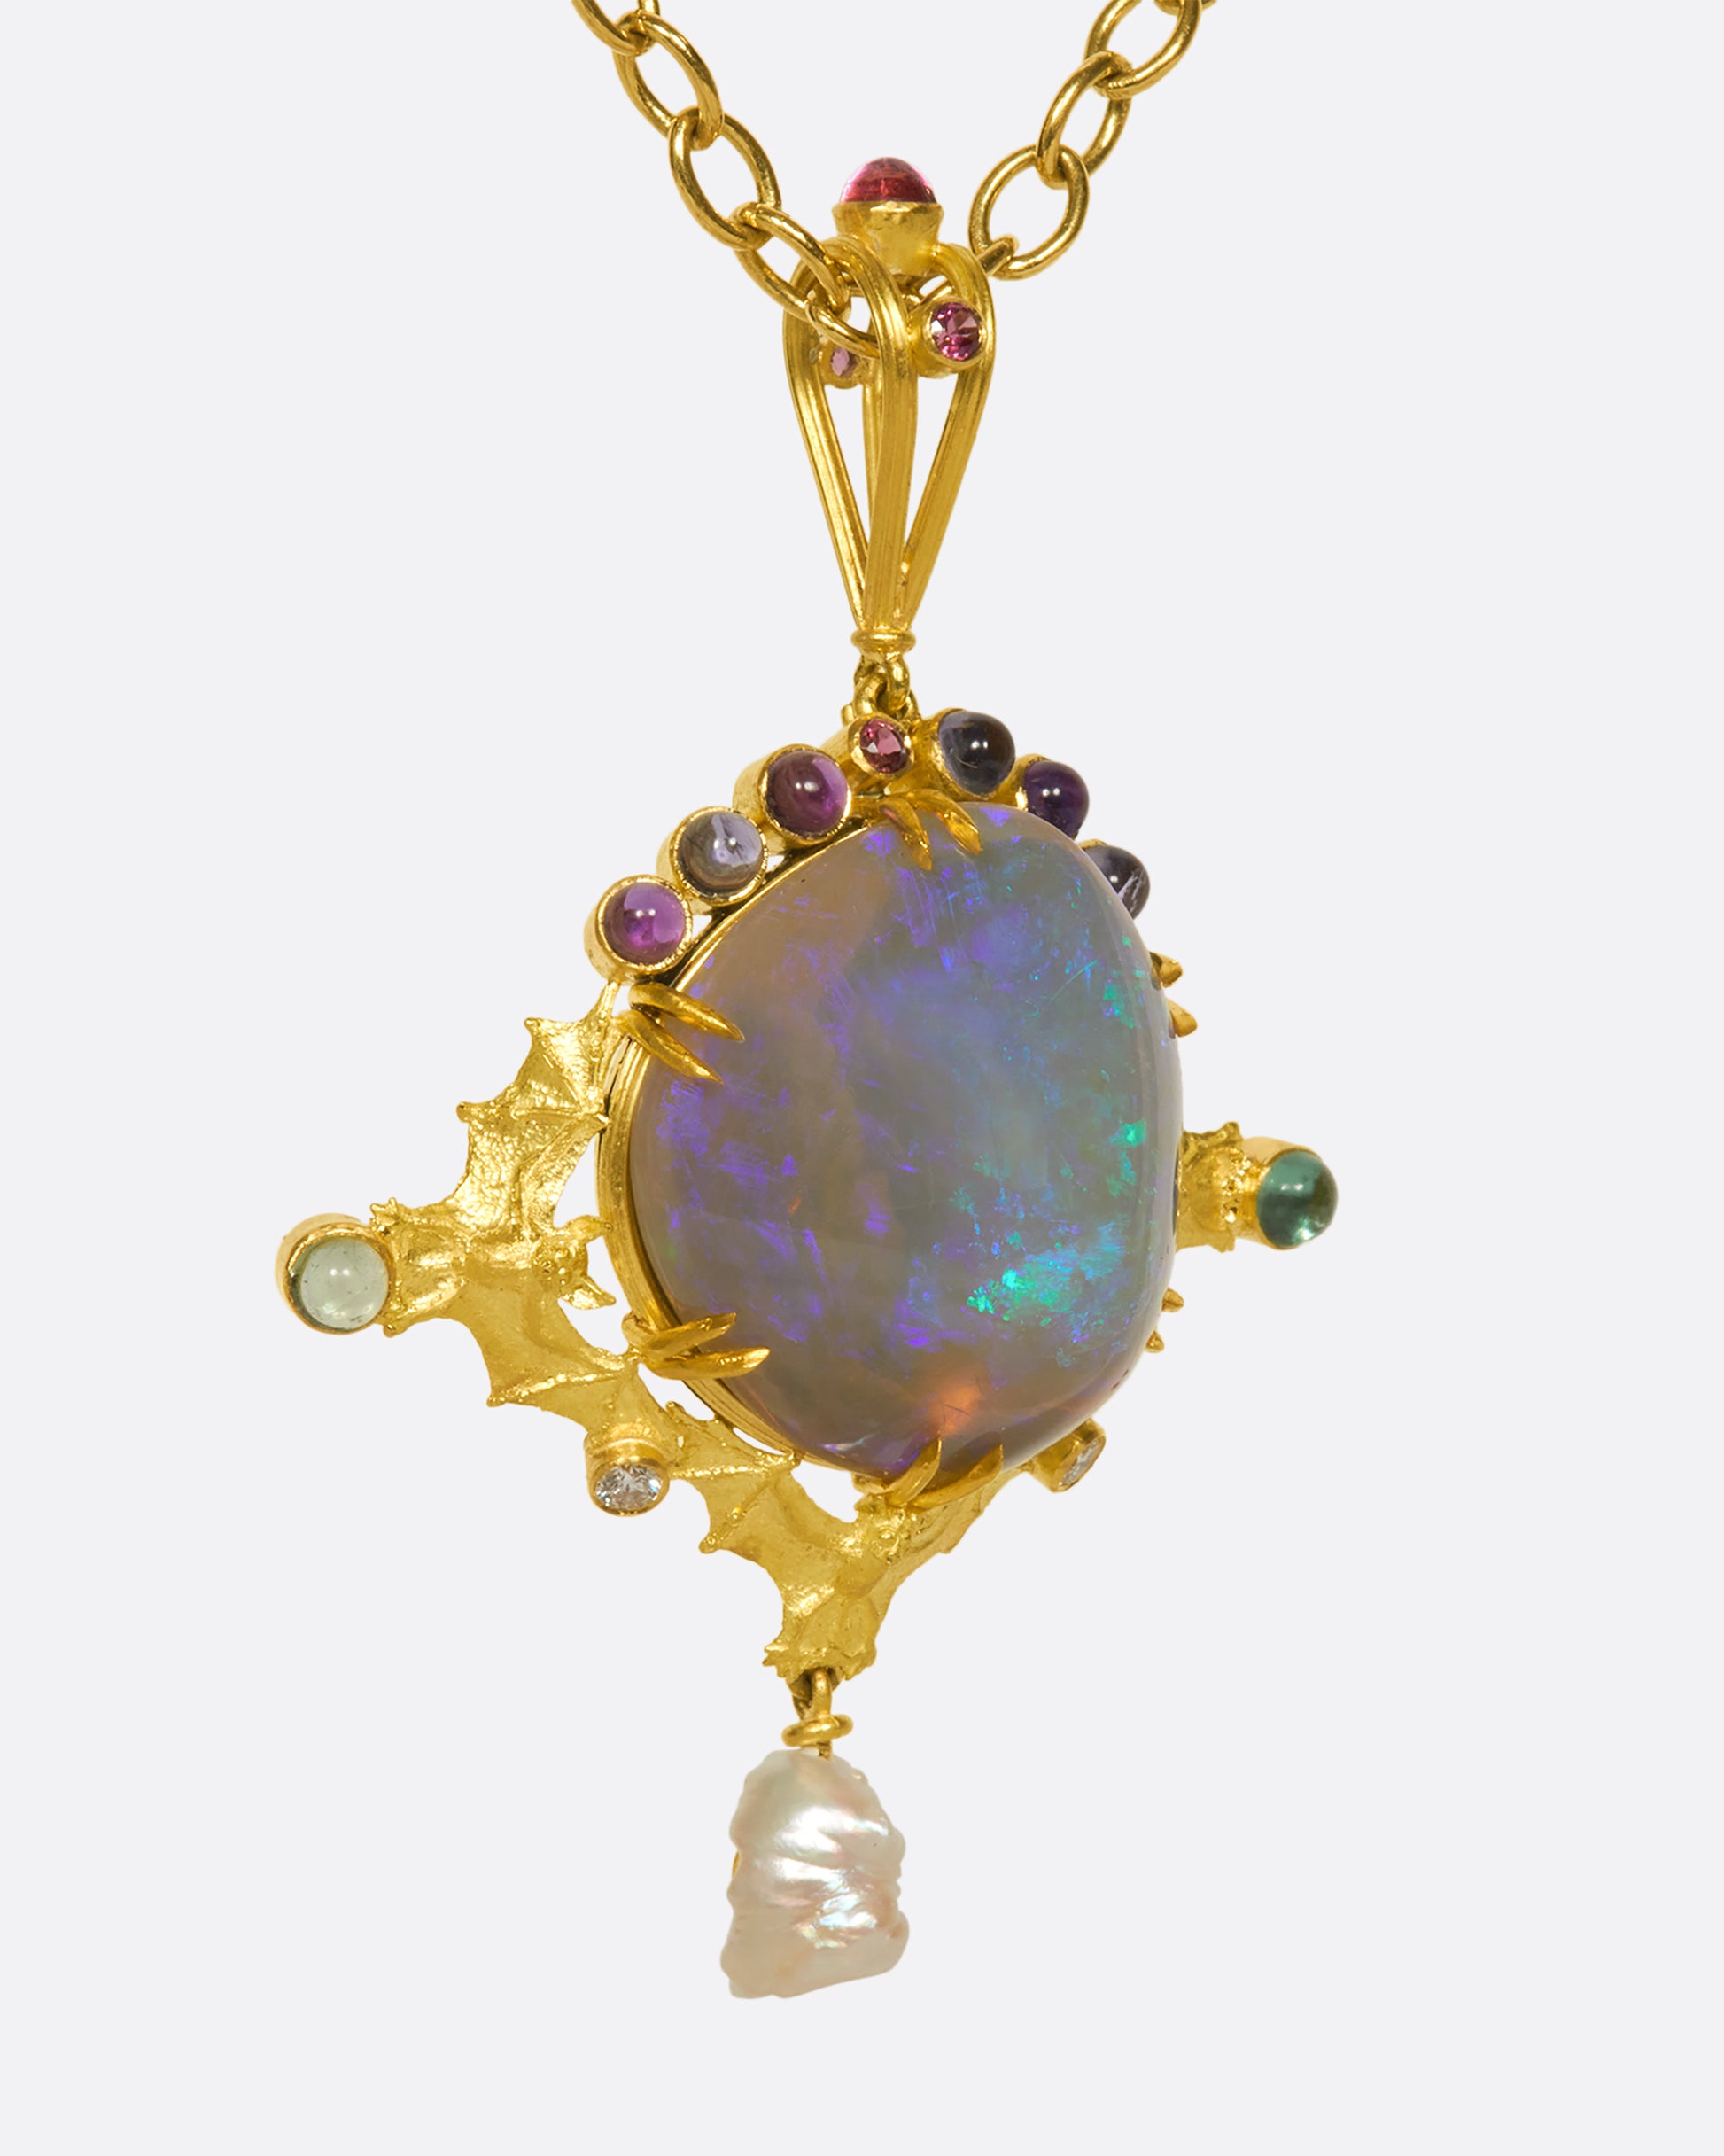 This incredible black opal pendant is held in place by three 18k gold bats and adorned with iolite, tourmaline, amethyst, natural pearl, and diamonds.